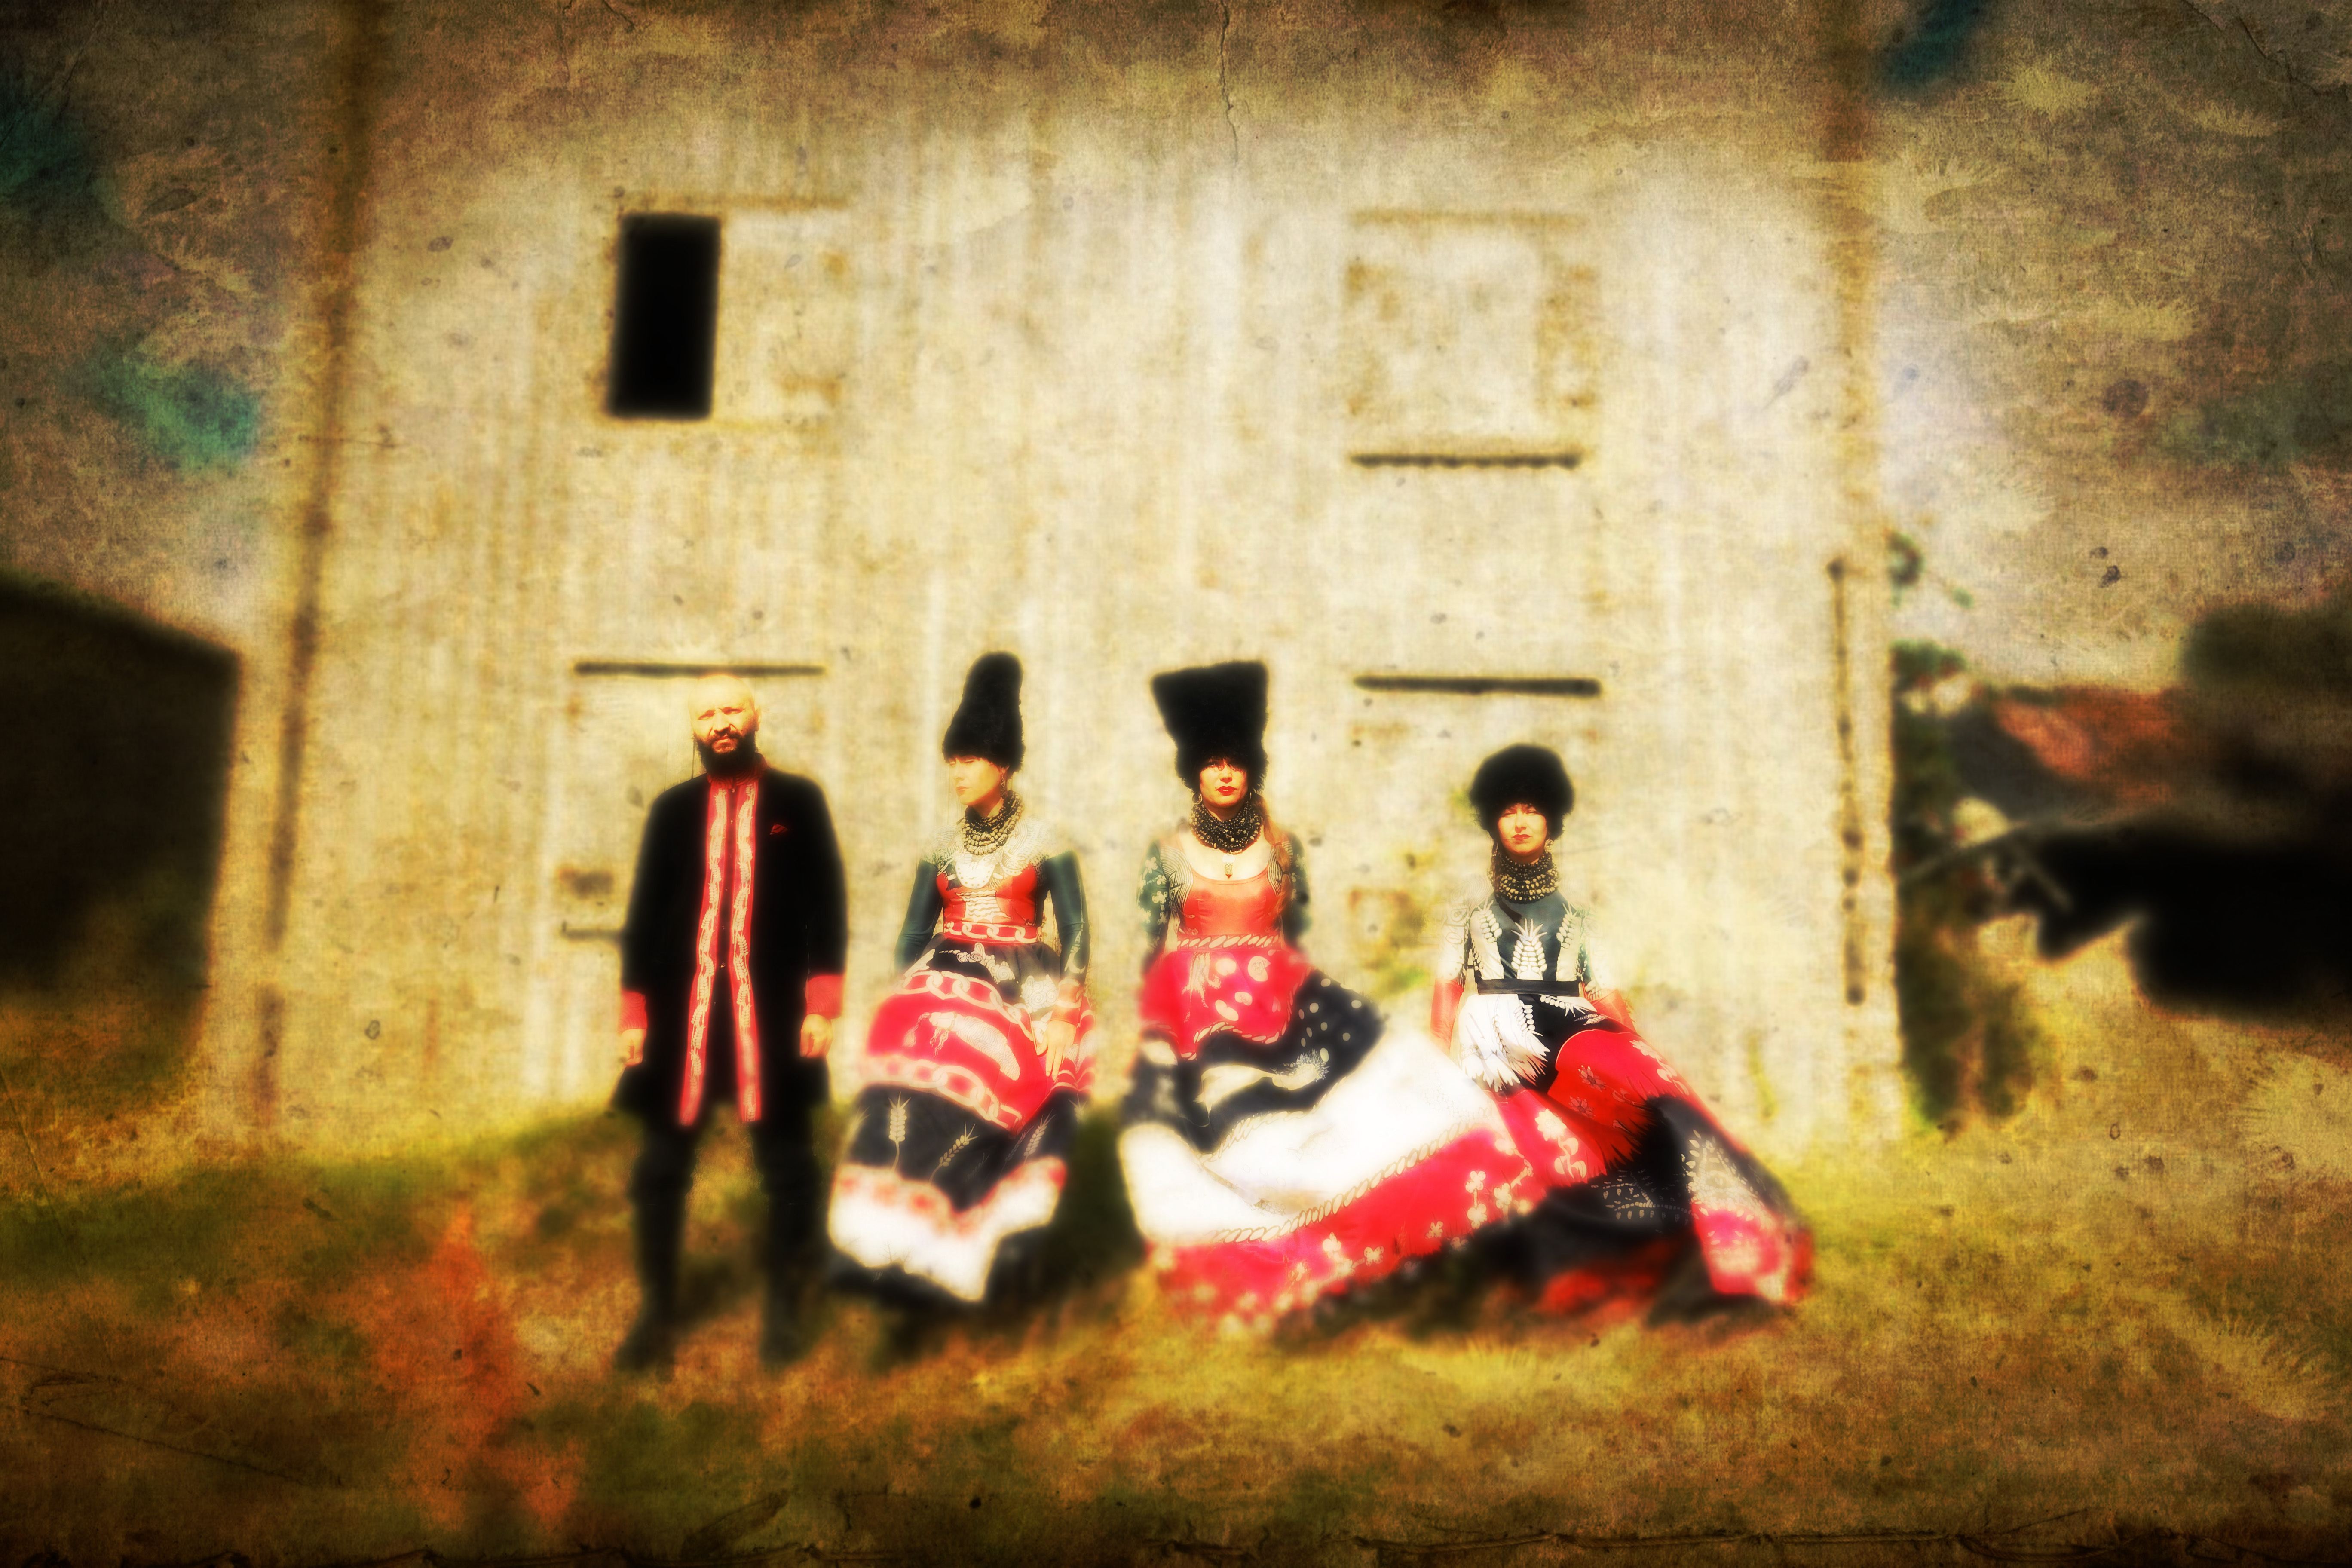 4 band members in traditional Ukranian clothing, standing against a light yellow background